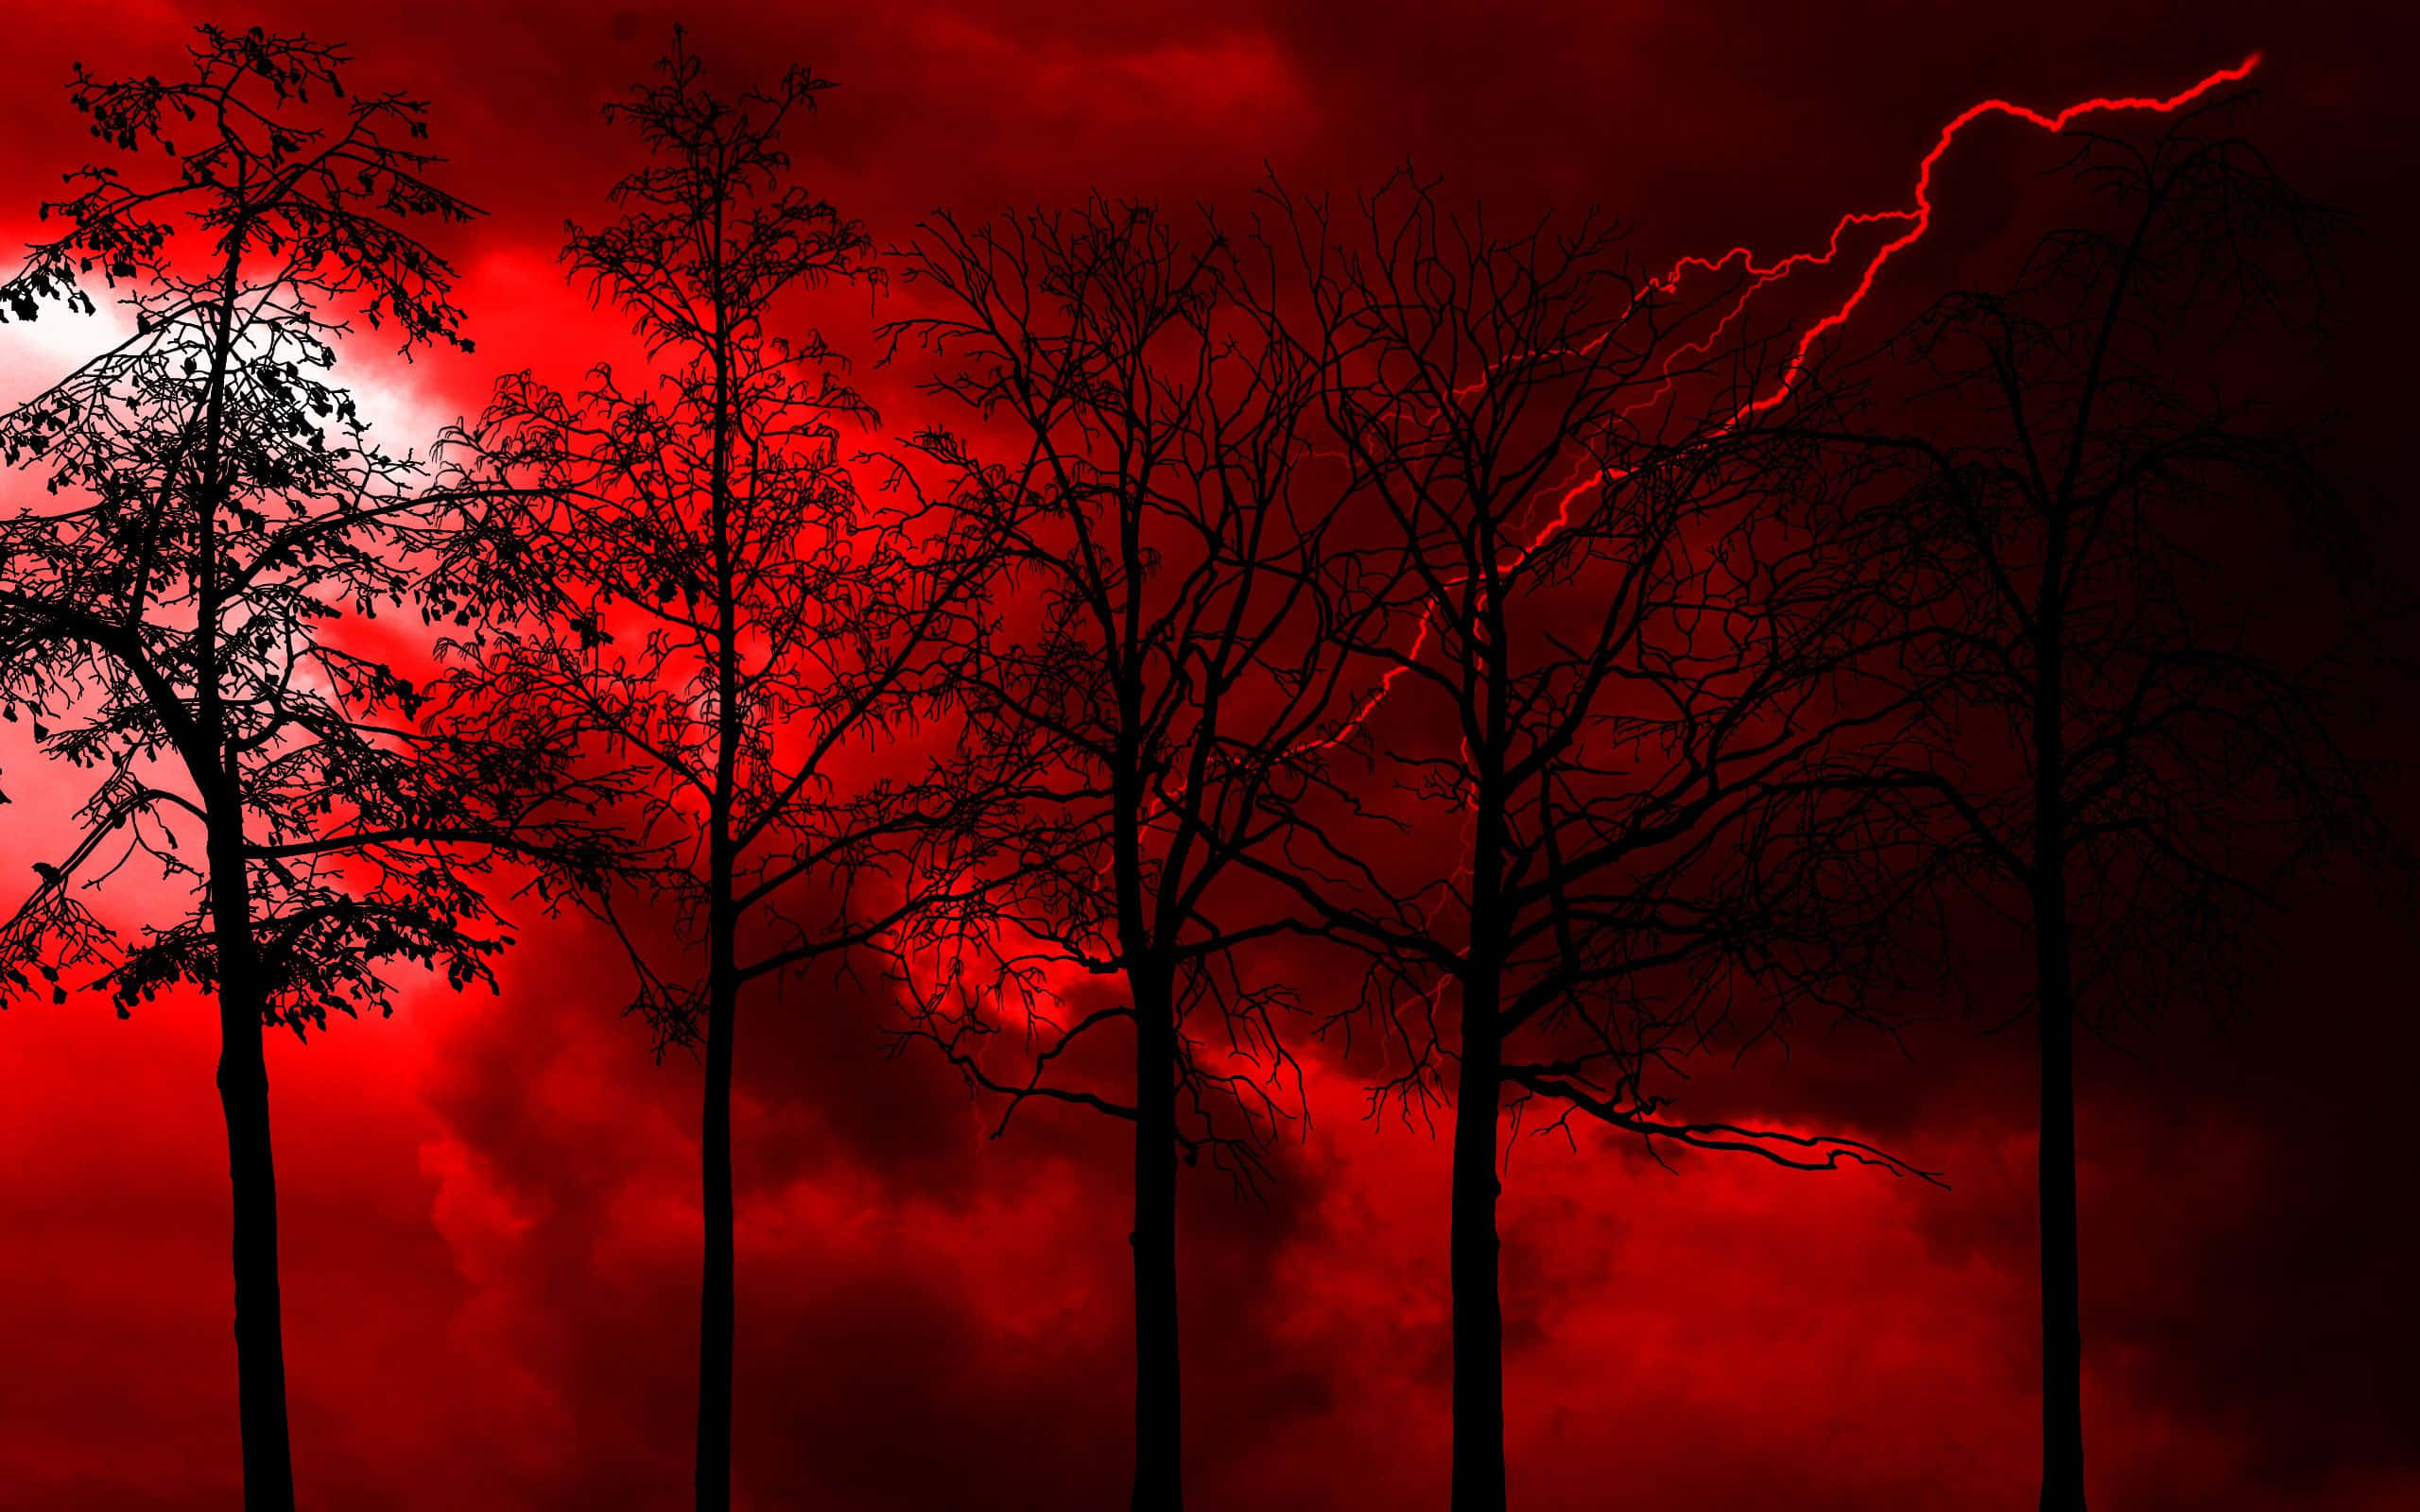 Red Lightning - A Powerful Natural Phenomenon